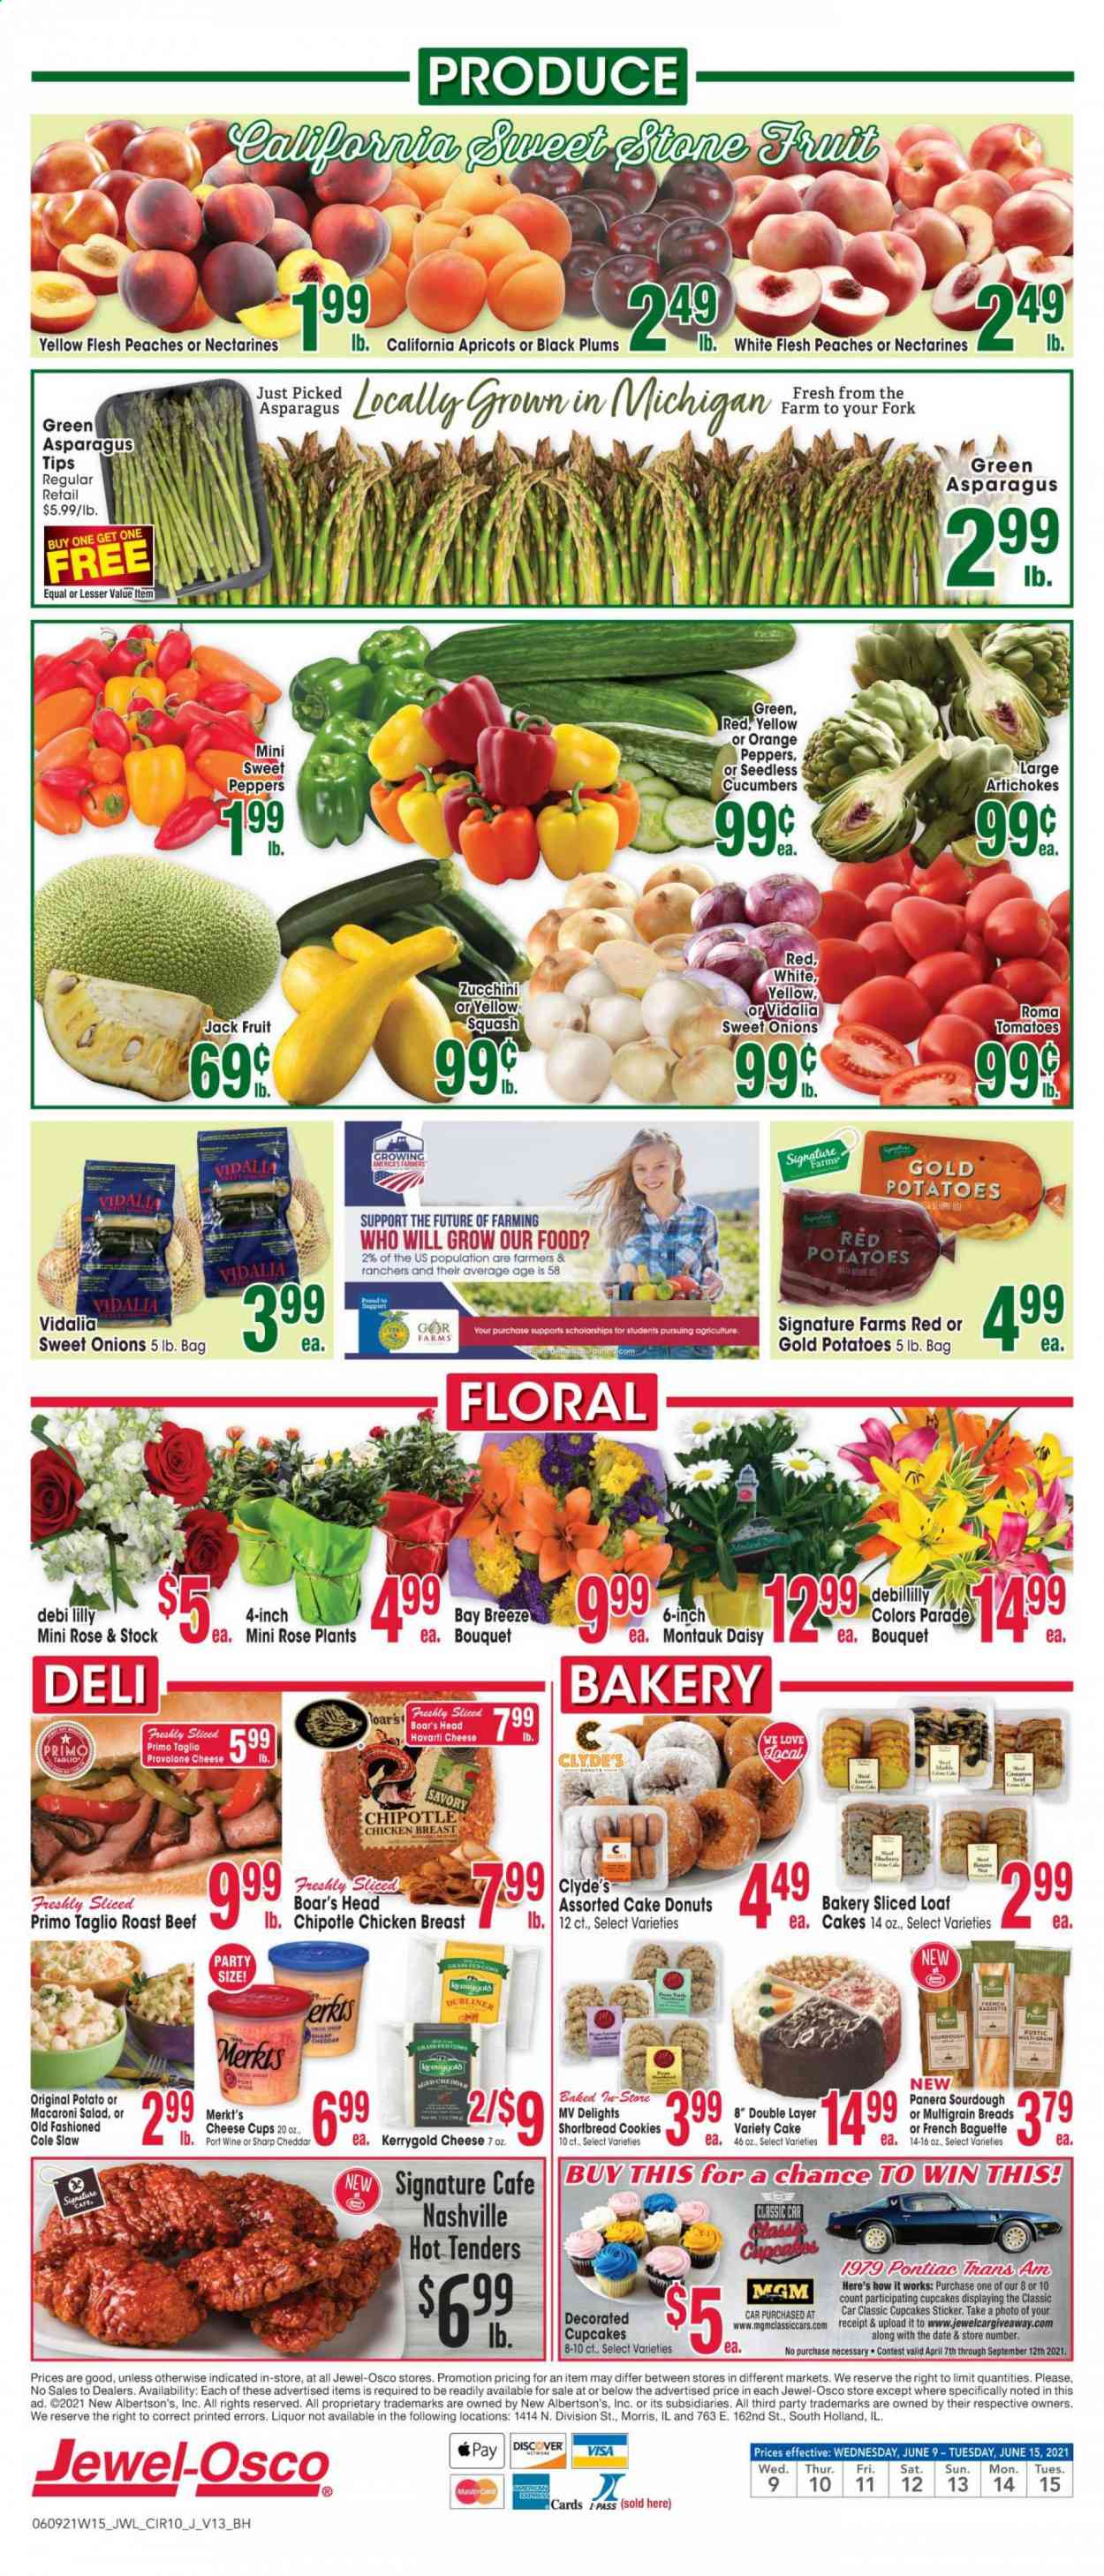 thumbnail - Jewel Osco Flyer - 06/09/2021 - 06/15/2021 - Sales products - plums, baguette, cake, cupcake, donut, artichoke, asparagus, cucumber, sweet peppers, tomatoes, zucchini, potatoes, red potatoes, yellow squash, oranges, apricots, macaroni salad, Havarti, cheddar, cheese cup, cheese, Provolone, cookies, wine, port wine, chicken breasts, fork, cup, sticker, bouquet, nectarines, black plums, peaches. Page 10.